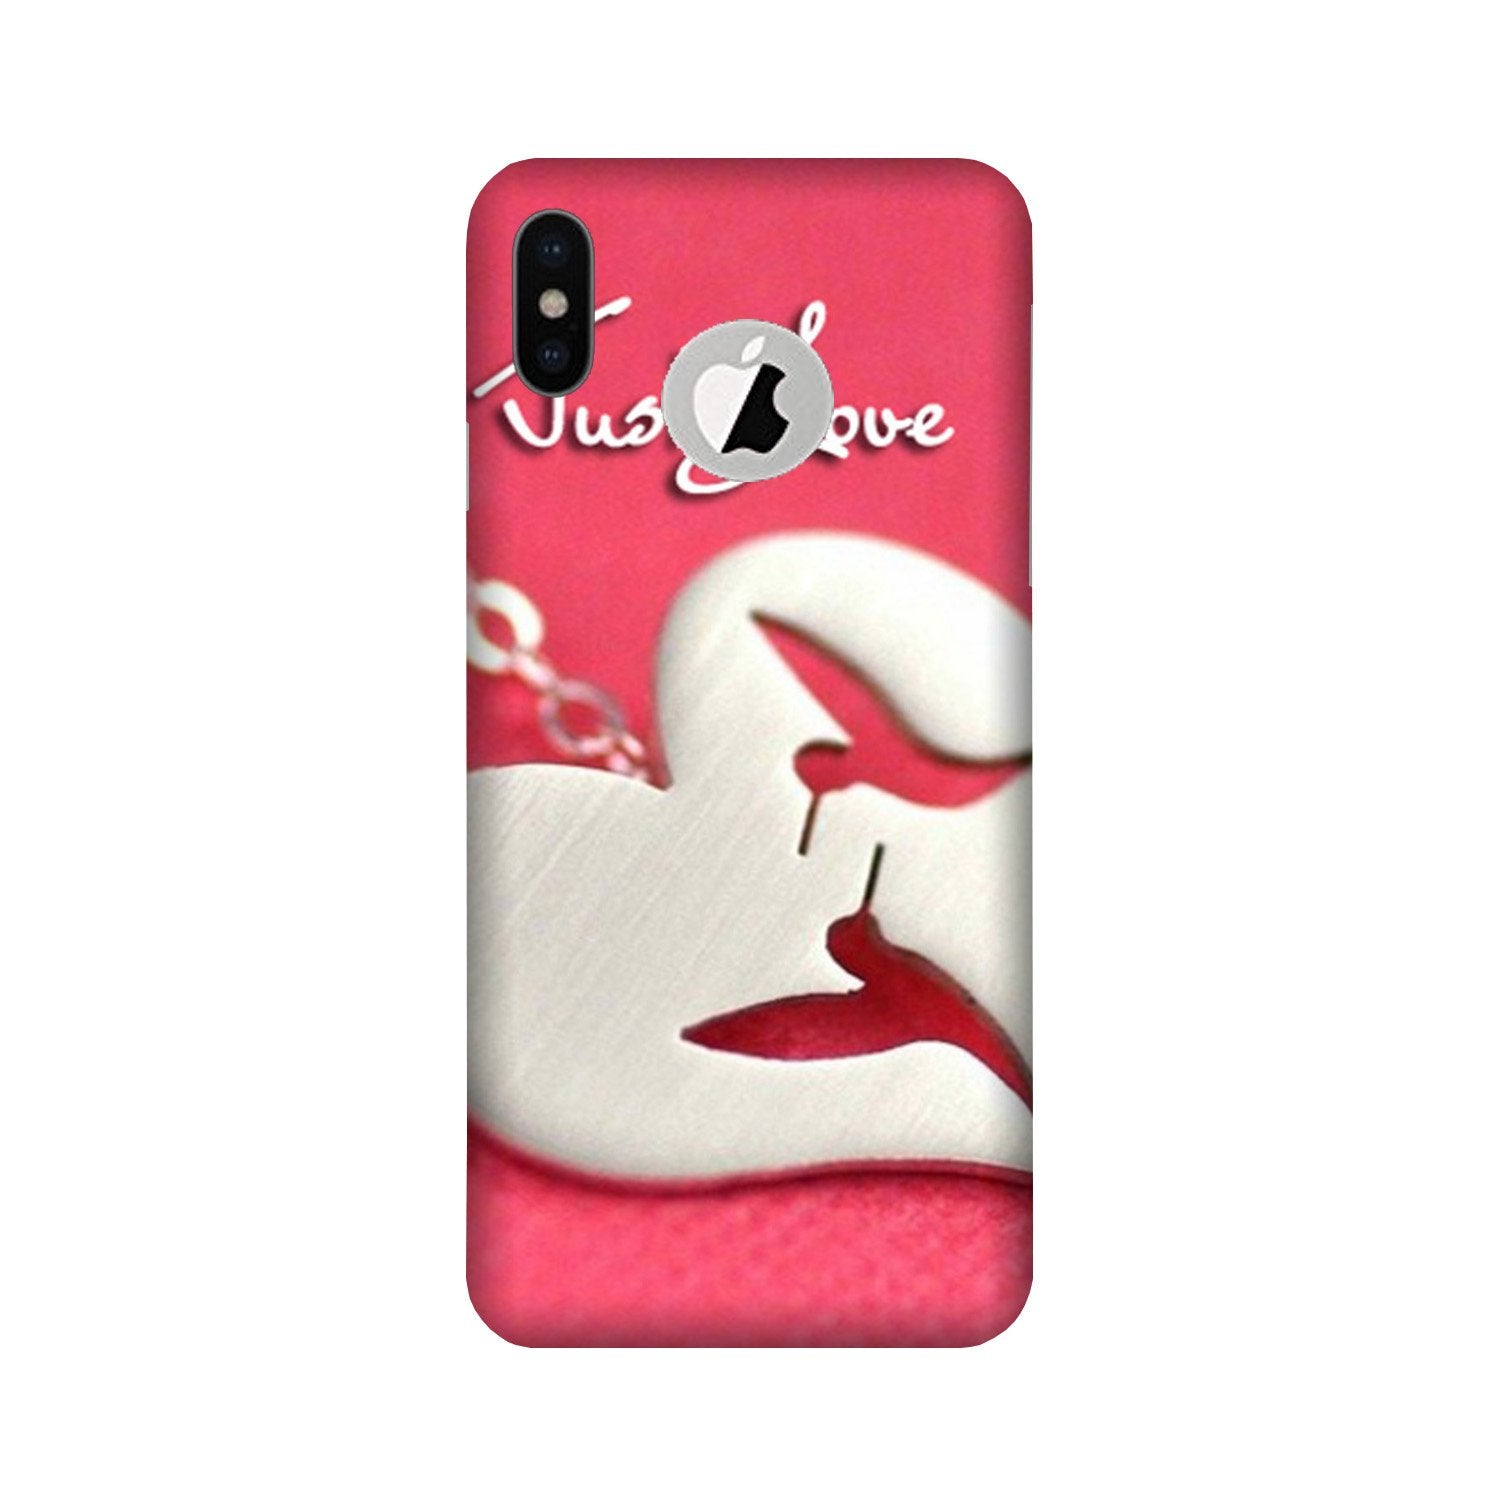 Just love Case for iPhone Xs logo cut 